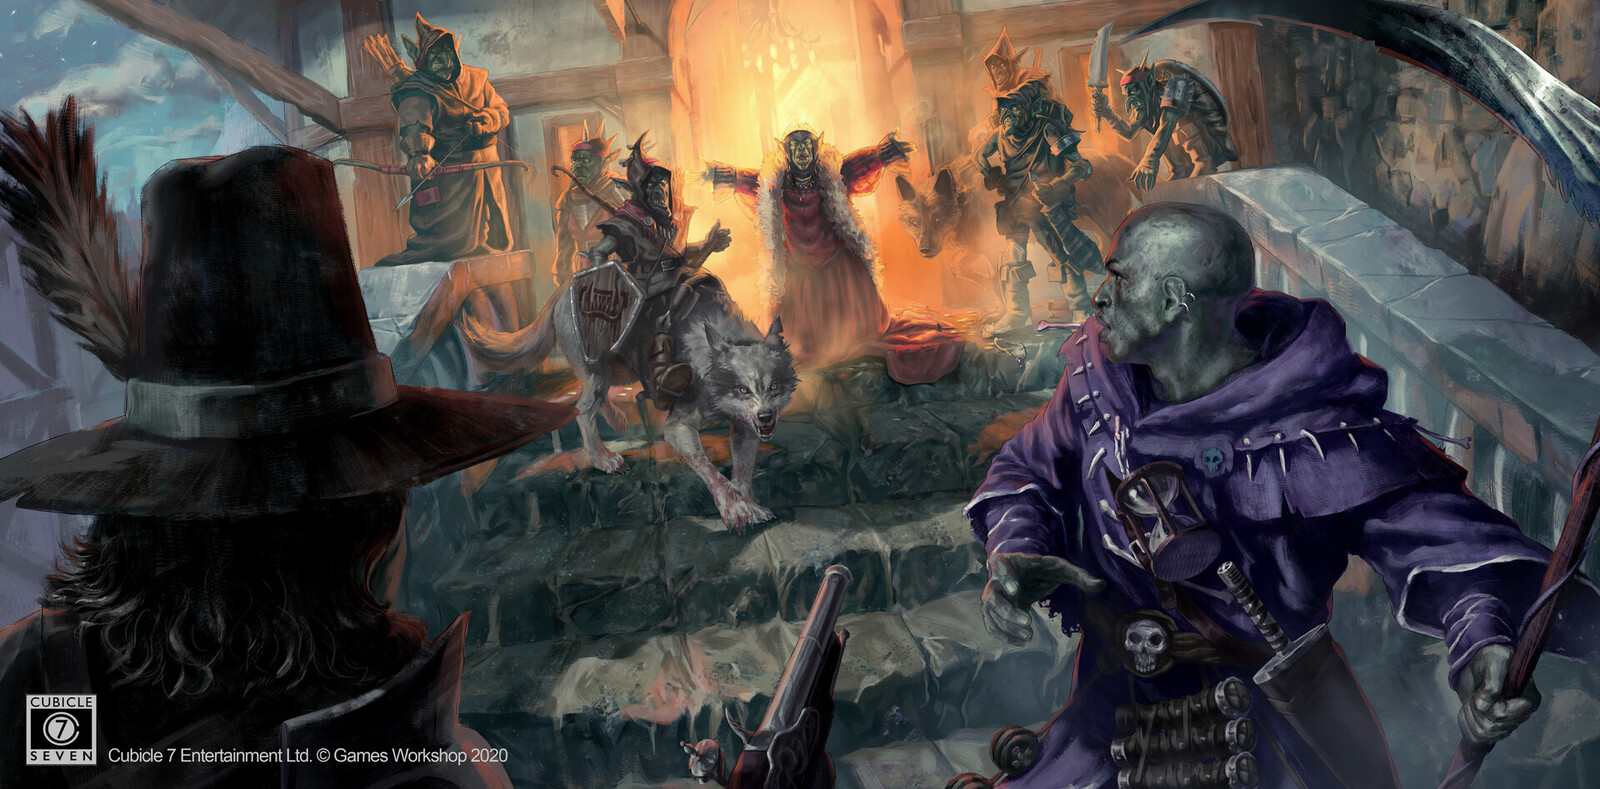 Goblins of the Twisted Maw
Warhammer Fantasy Roleplay
Death on The Reik
